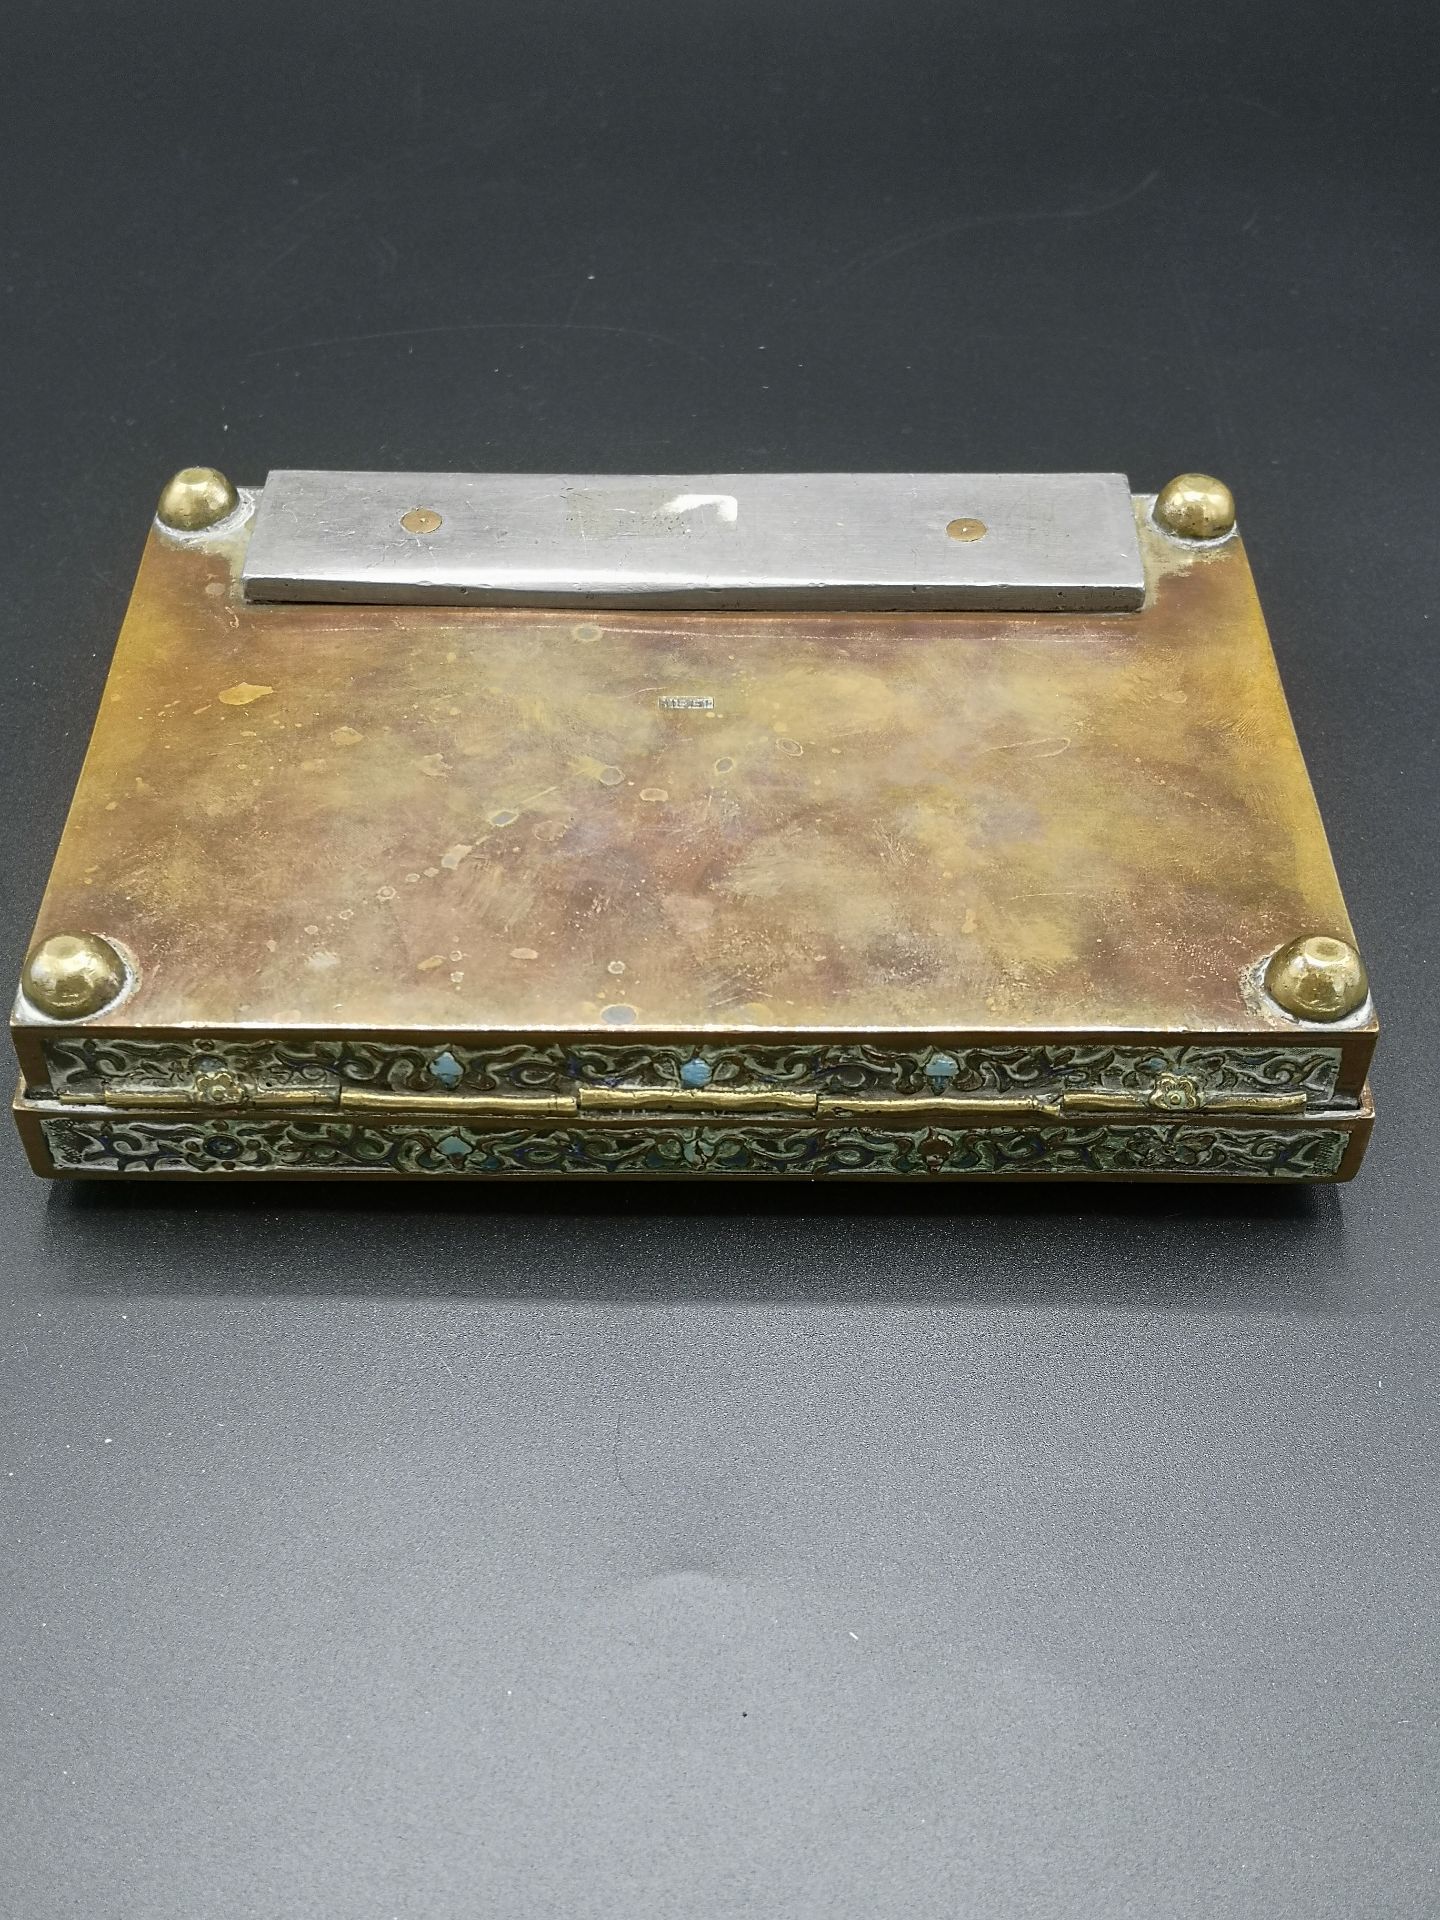 Brass and enamel box - Image 6 of 7